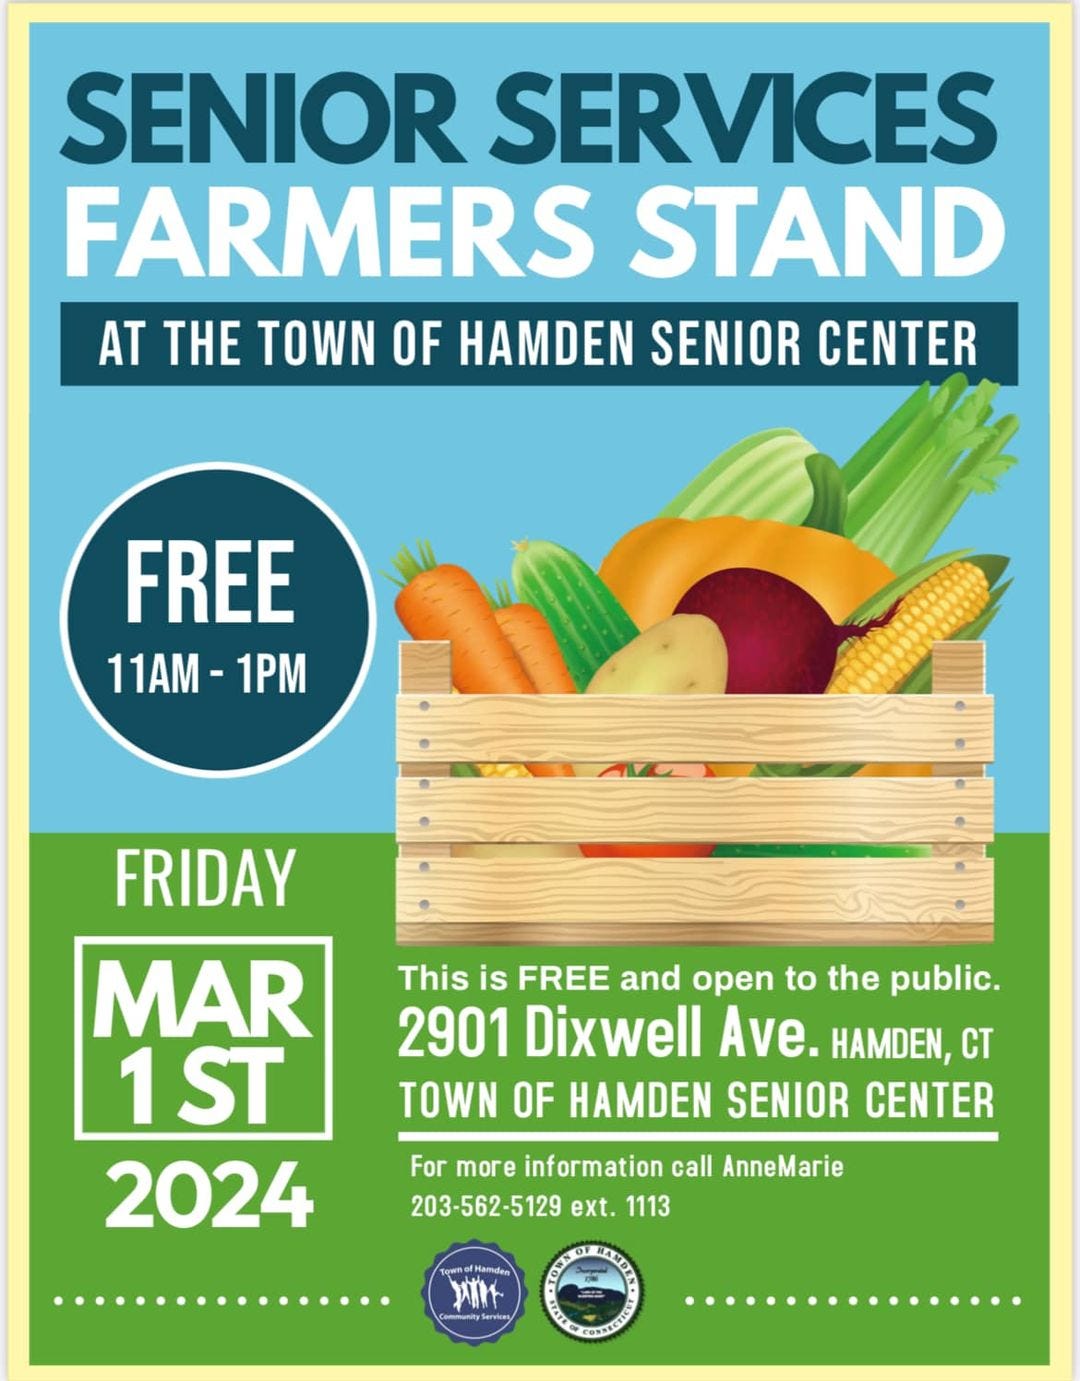 May be an image of text that says 'SENIOR SERVICES FARMERS STAND AT THE TOWN OF HAMDEN SENIOR CENTER FREE 11AM- 1PM FRIDAY MAR 1ST 2024 This is FREE and open to the public. 2901 Dixwell Ave. HAMDEN, CT TOWN OF HAMDEN SENIOR CENTER For more information call AnneMarie 203-562-5129 ext. 1113 እሉ t'